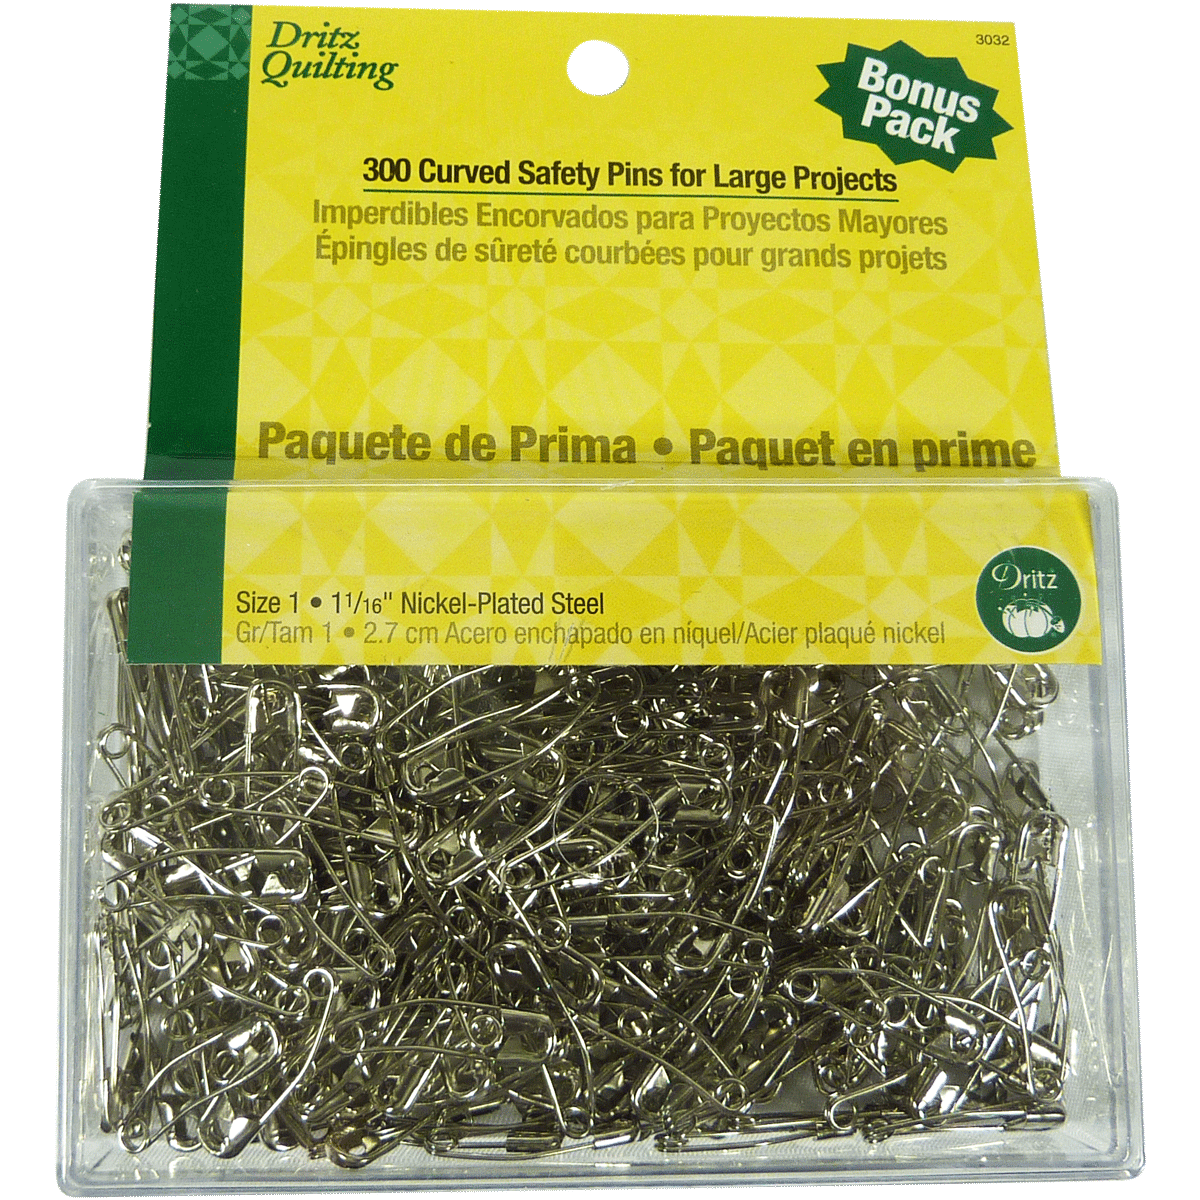 300 Curved Safety Pins - Dritz Quilting